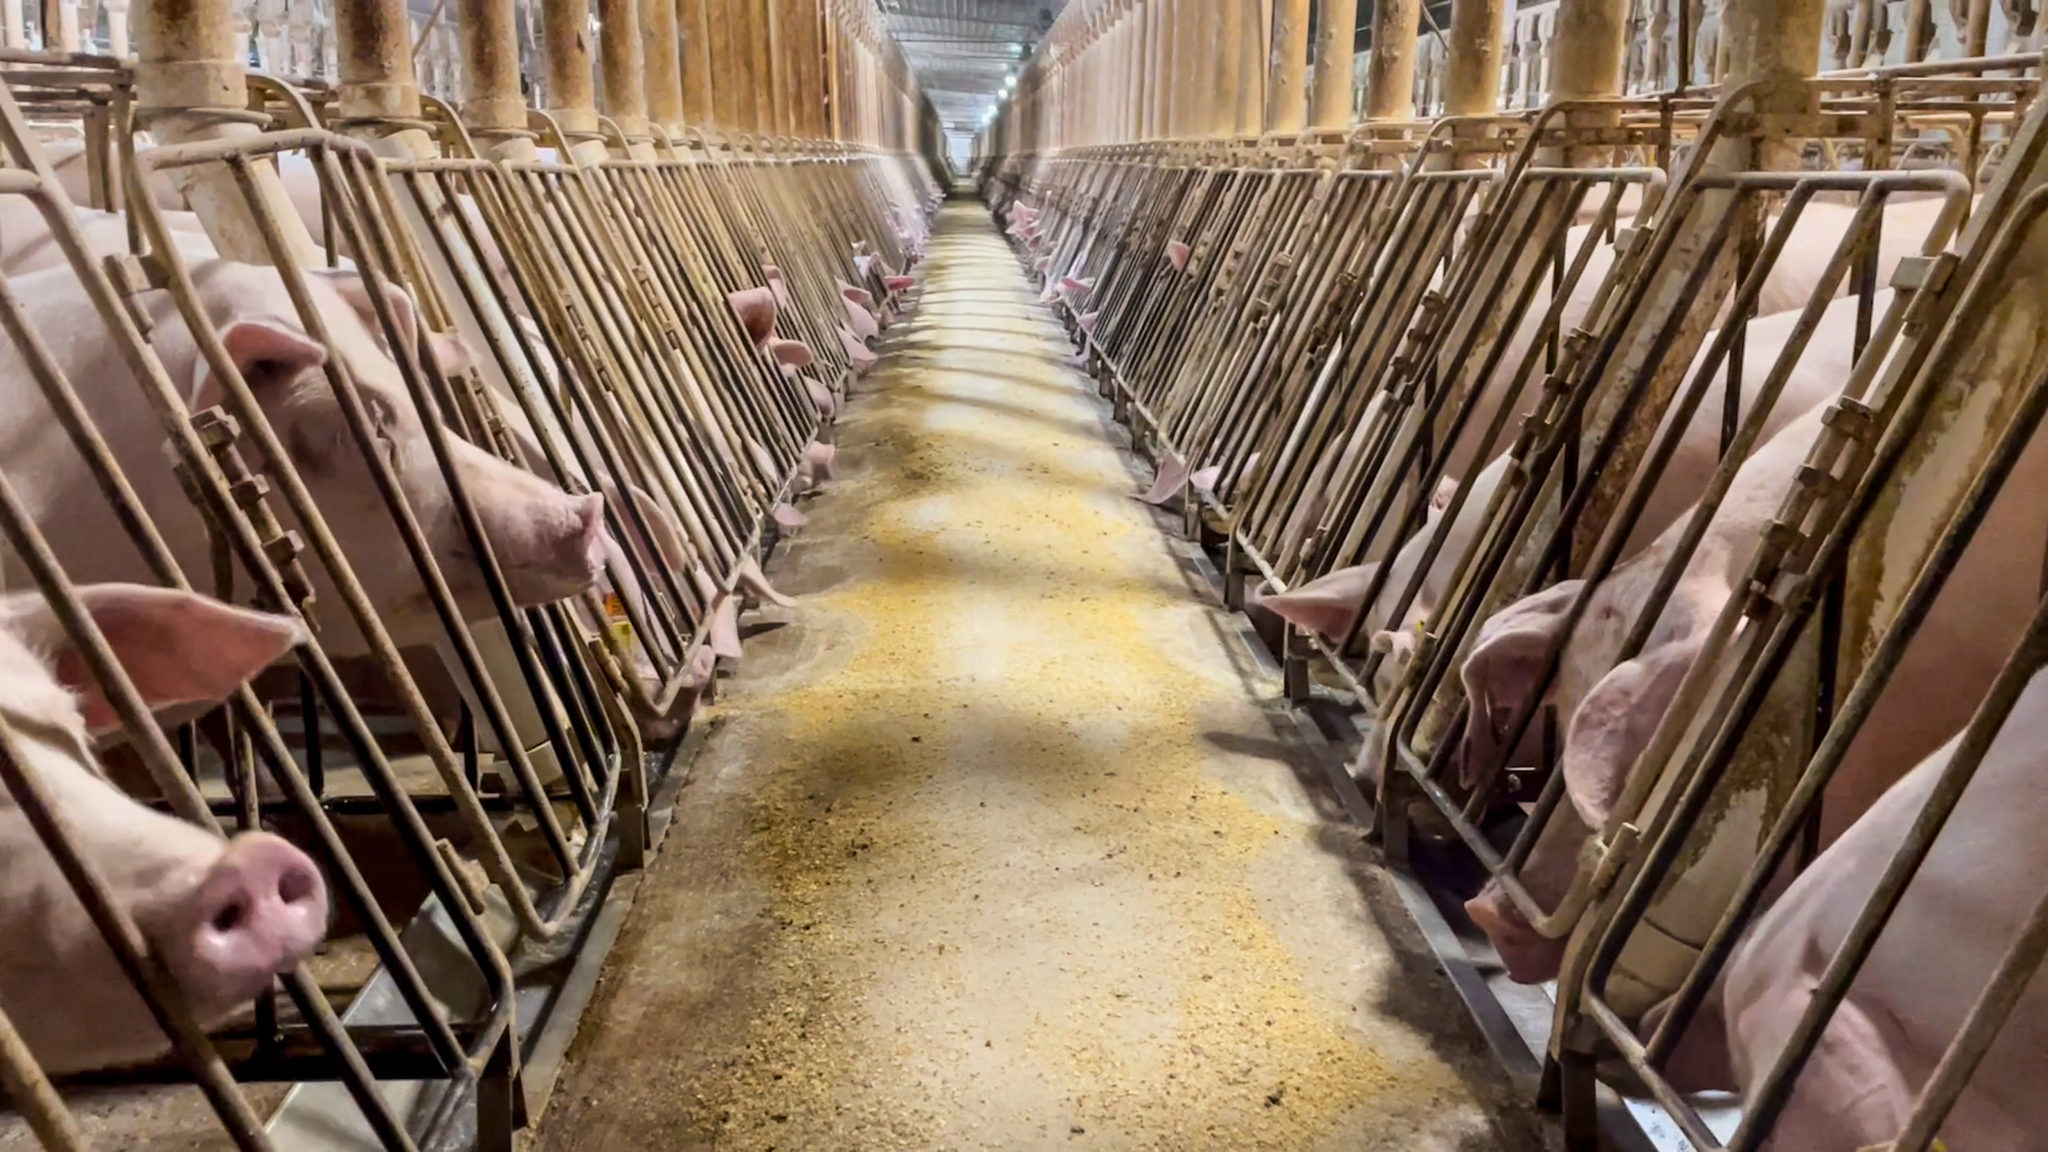 Breaking Investigation: Horrific Conditions Drive Mother Pigs Mad